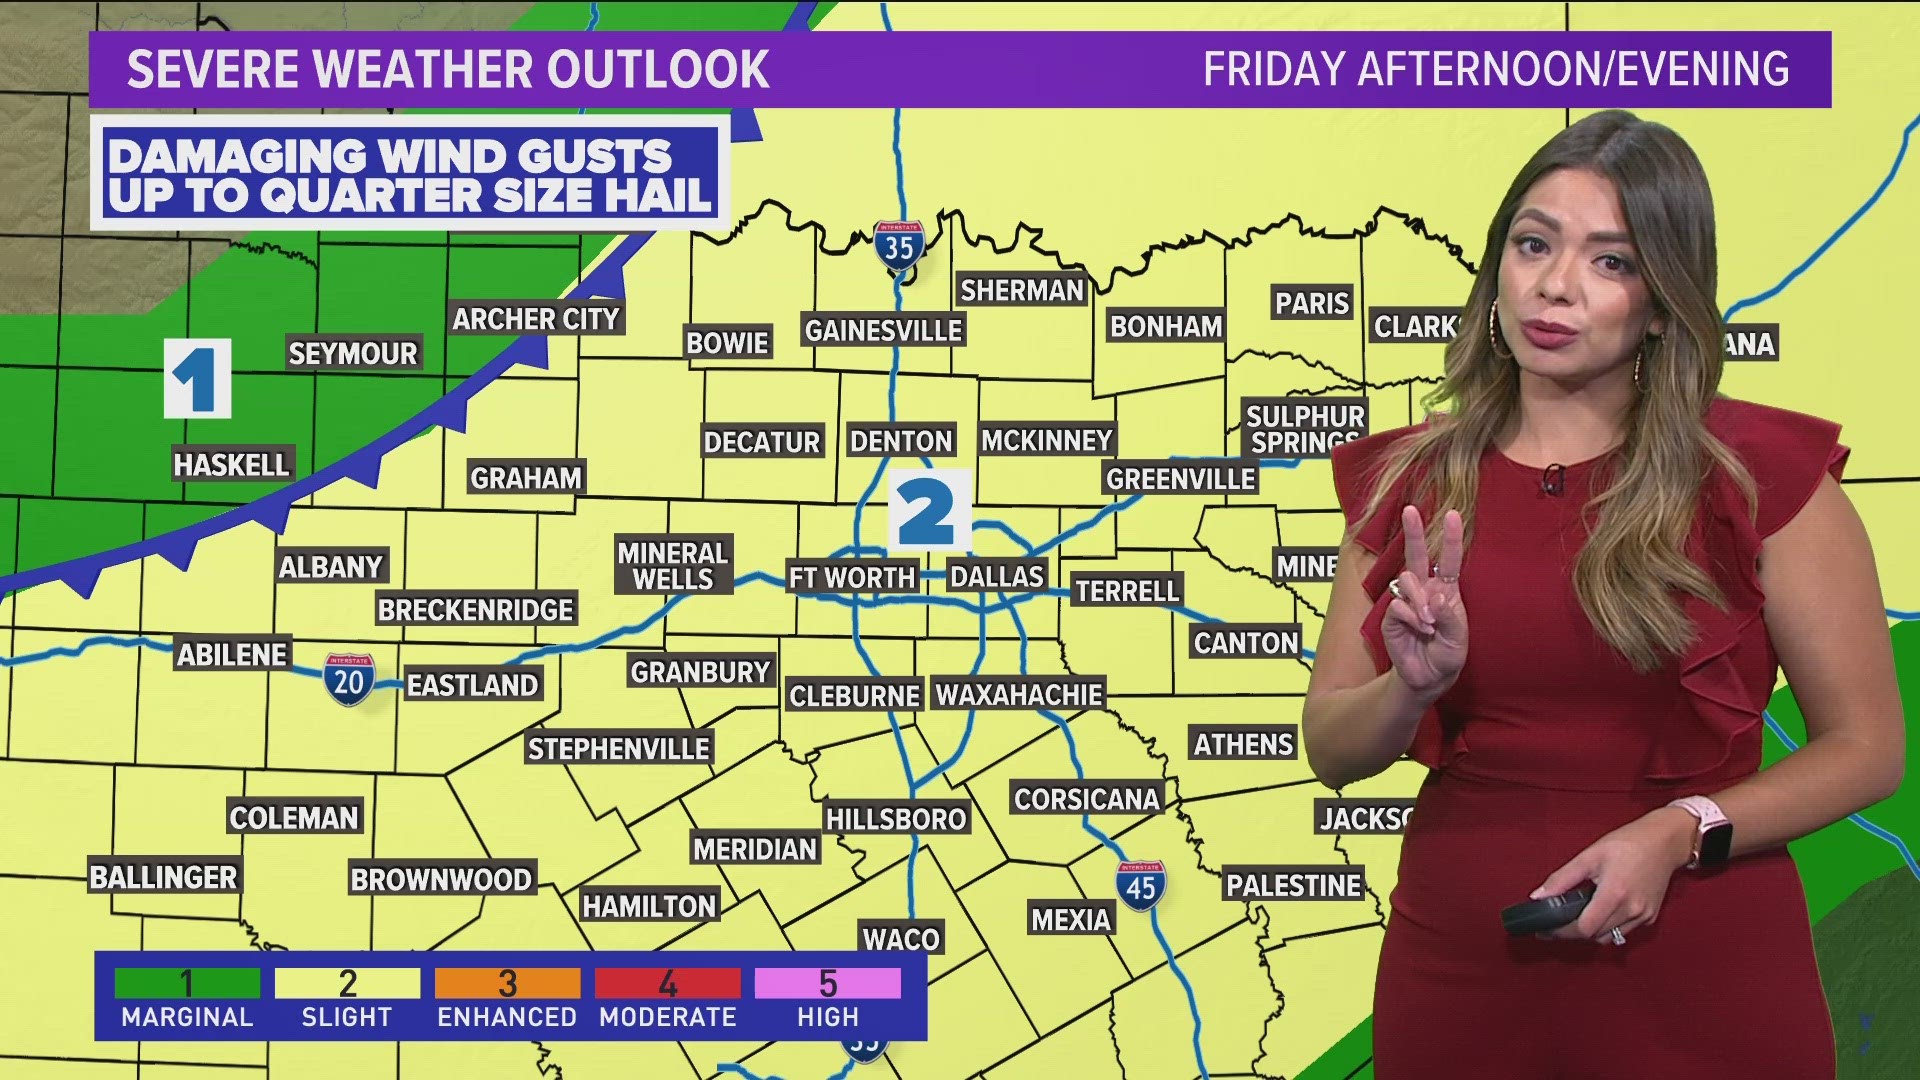 DFW Weather: Warmer and more humid before scattered storms arrive Friday. Nice weekend ahead. Update with Meteorologist Mariel Ruiz.